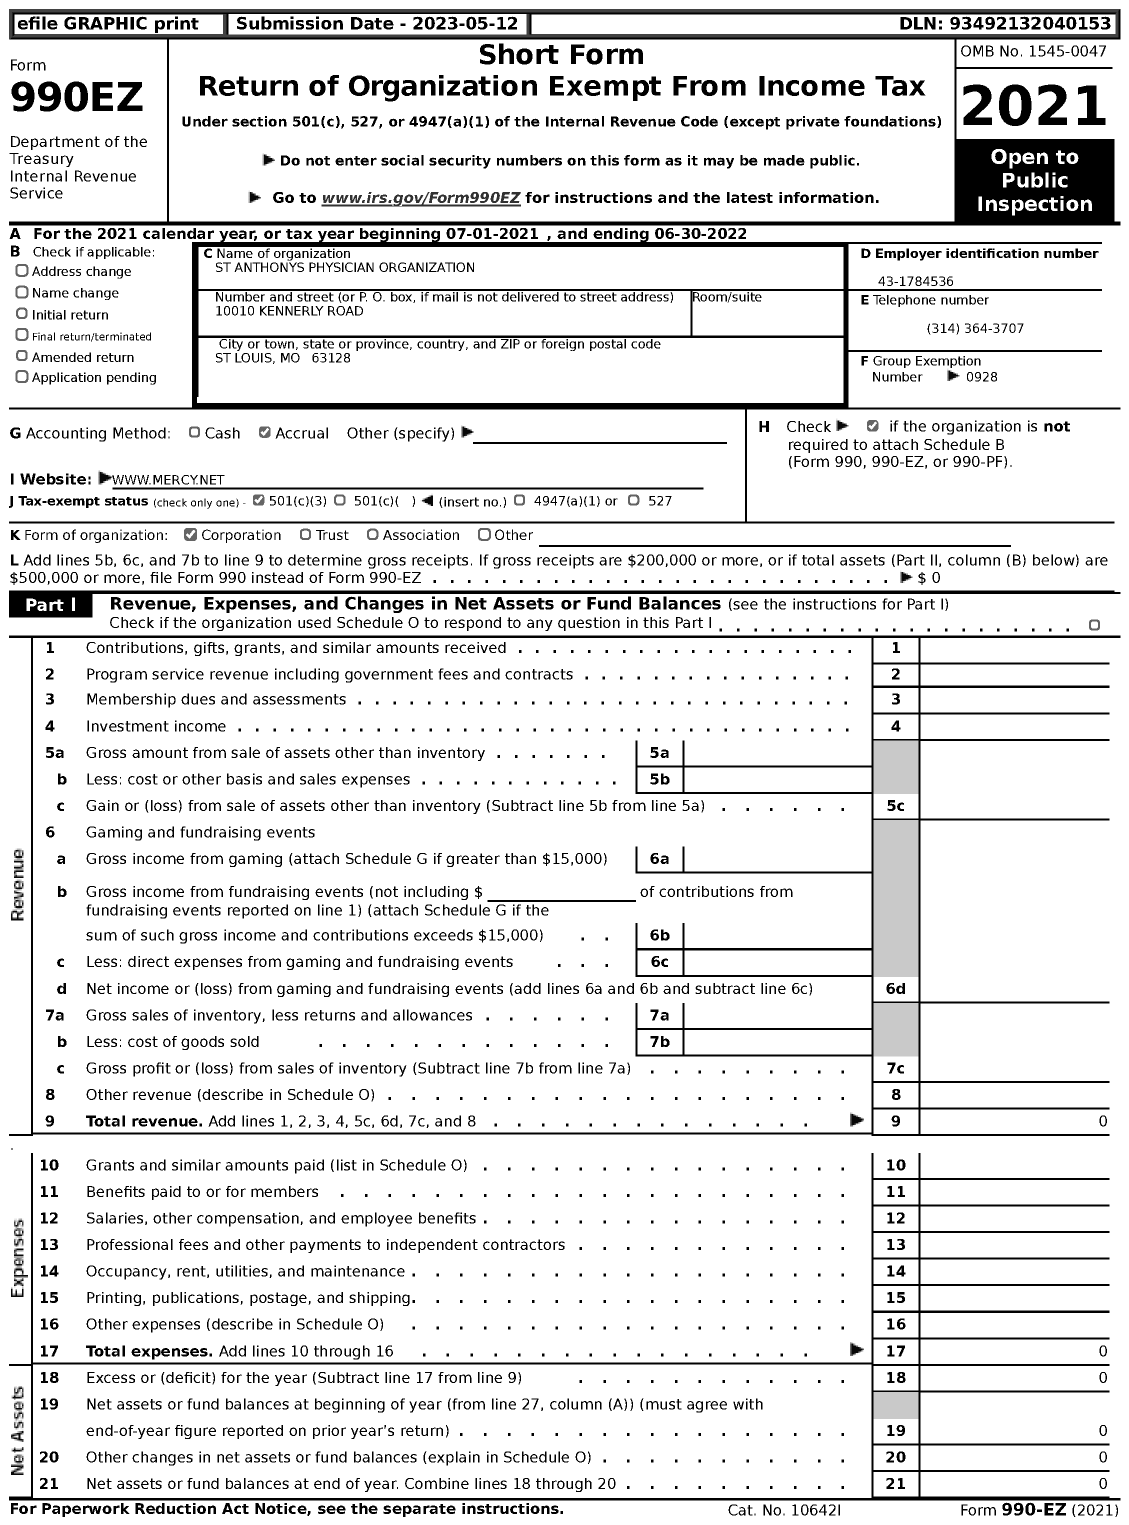 Image of first page of 2021 Form 990EZ for St Anthonys Physician Organization